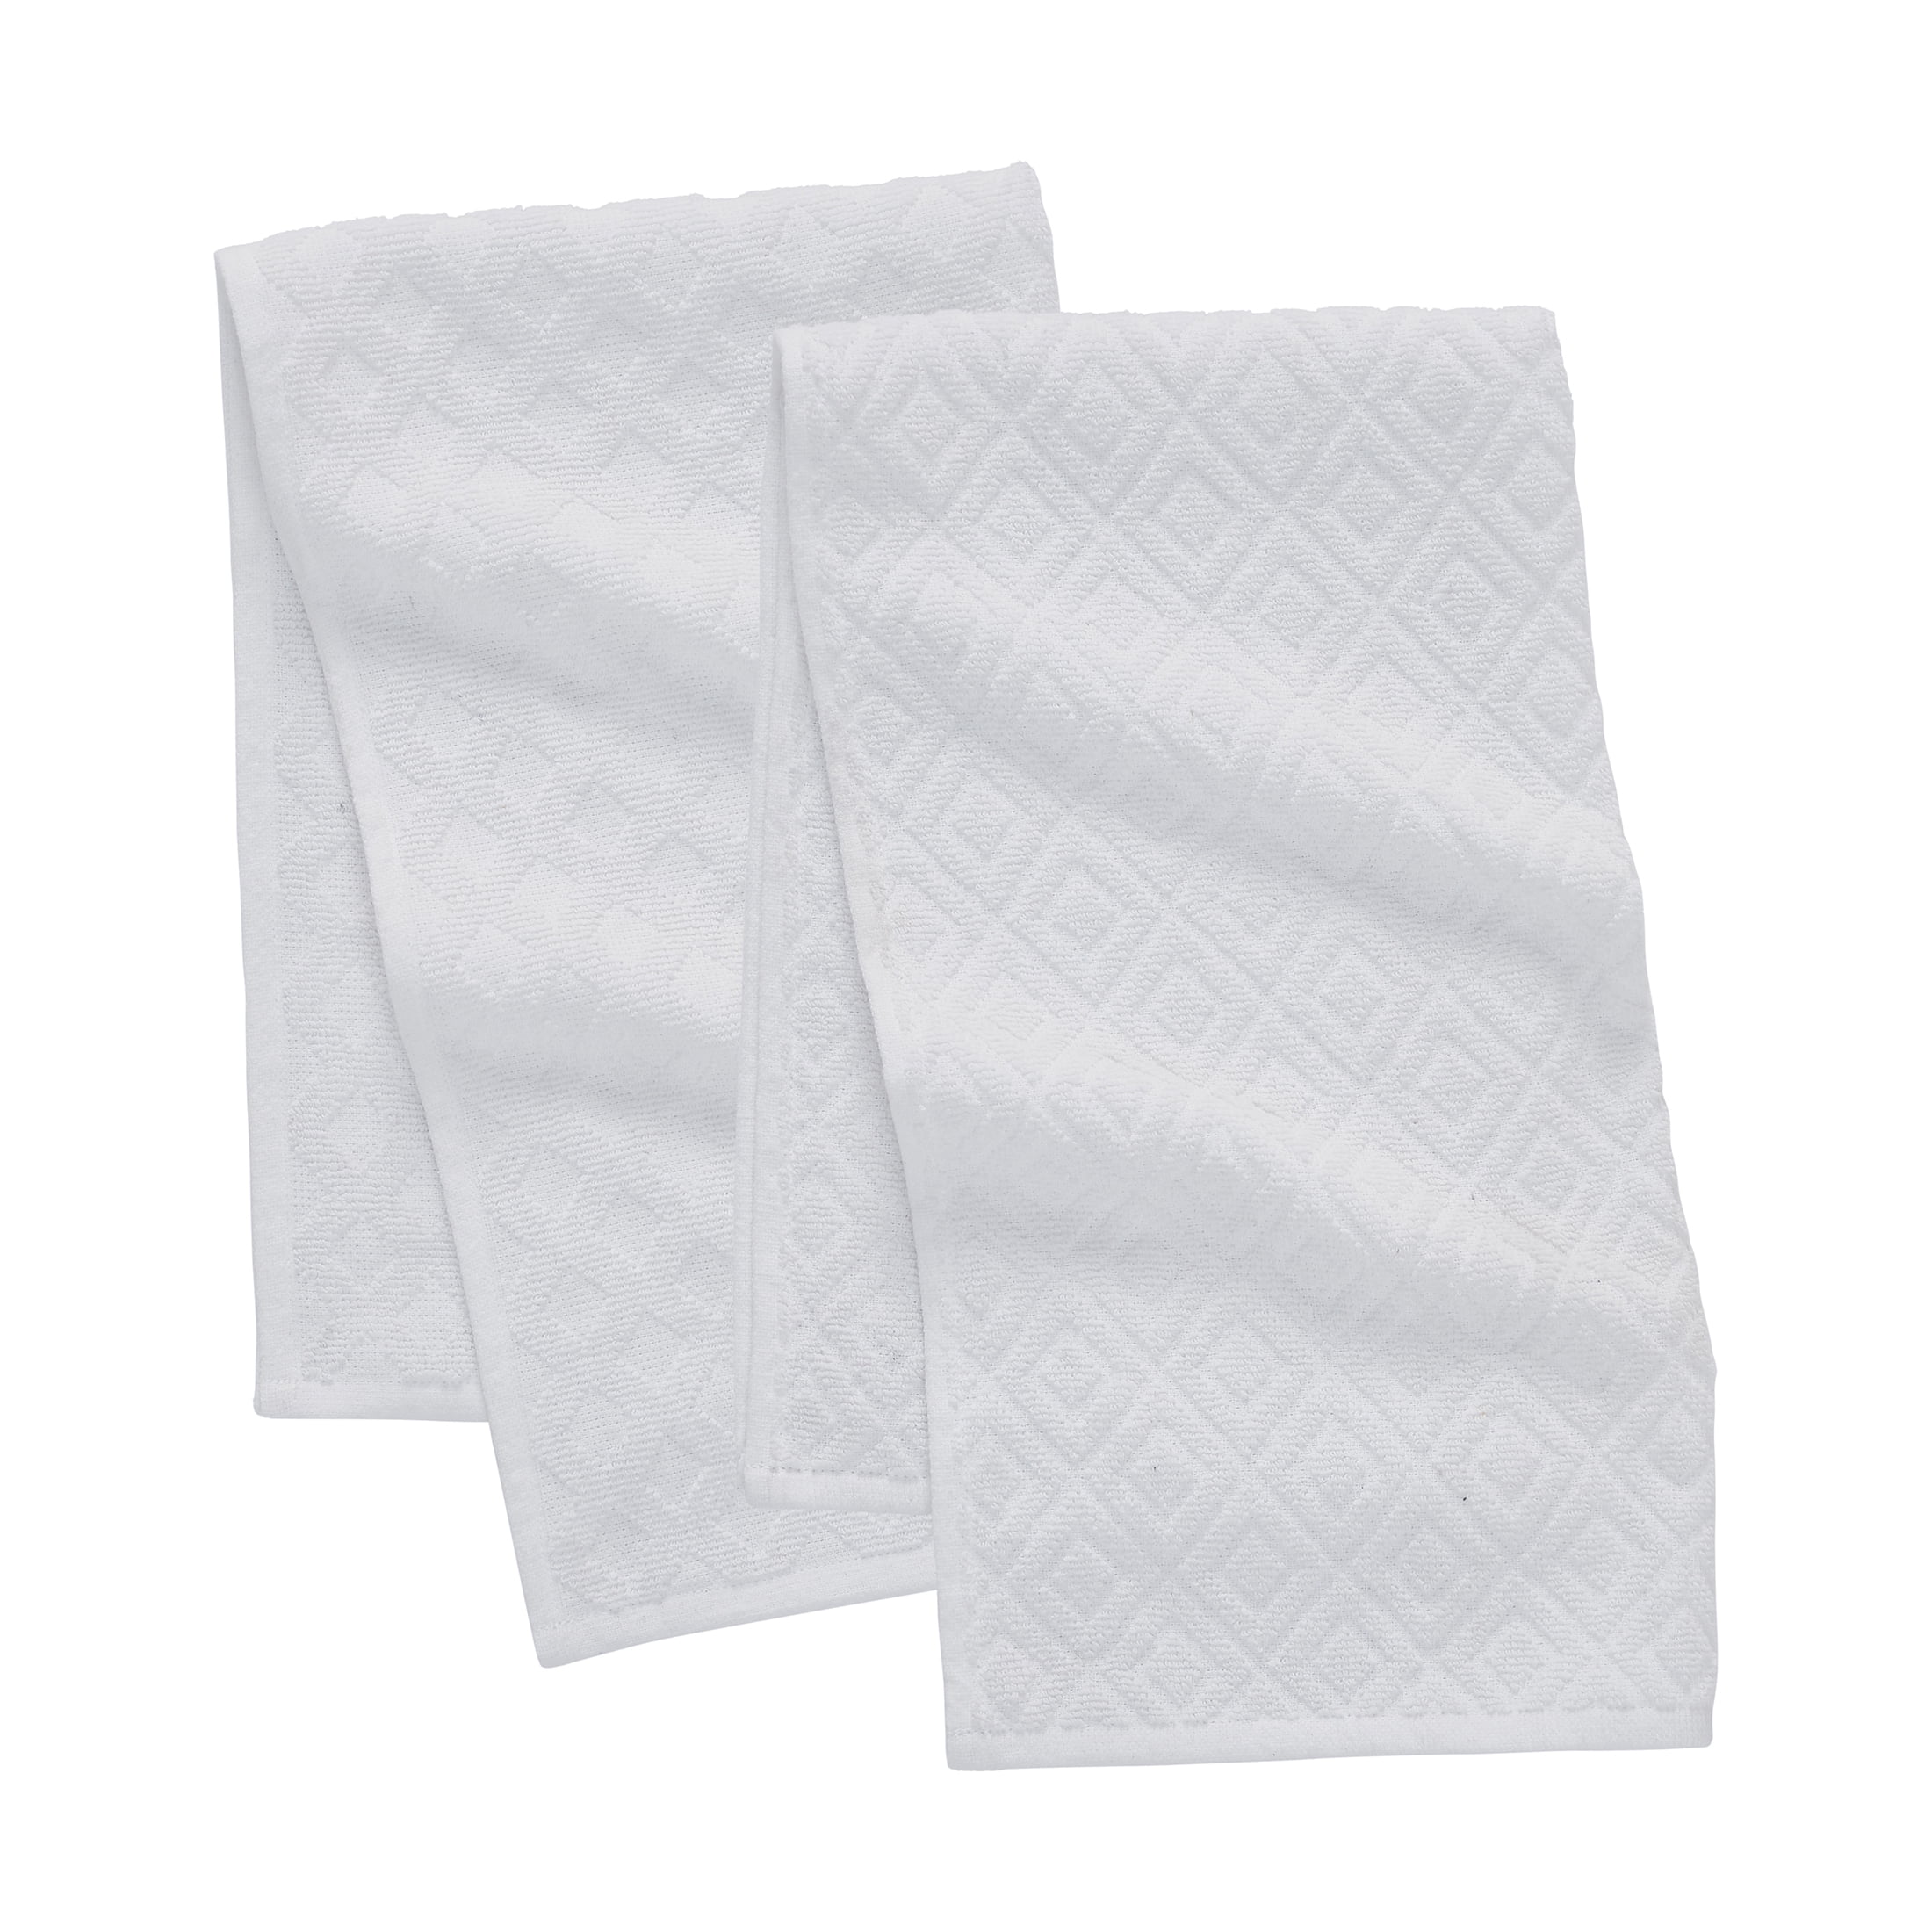 My Texas House Woven Cotton Terry Kitchen Towels - White - 1 Each